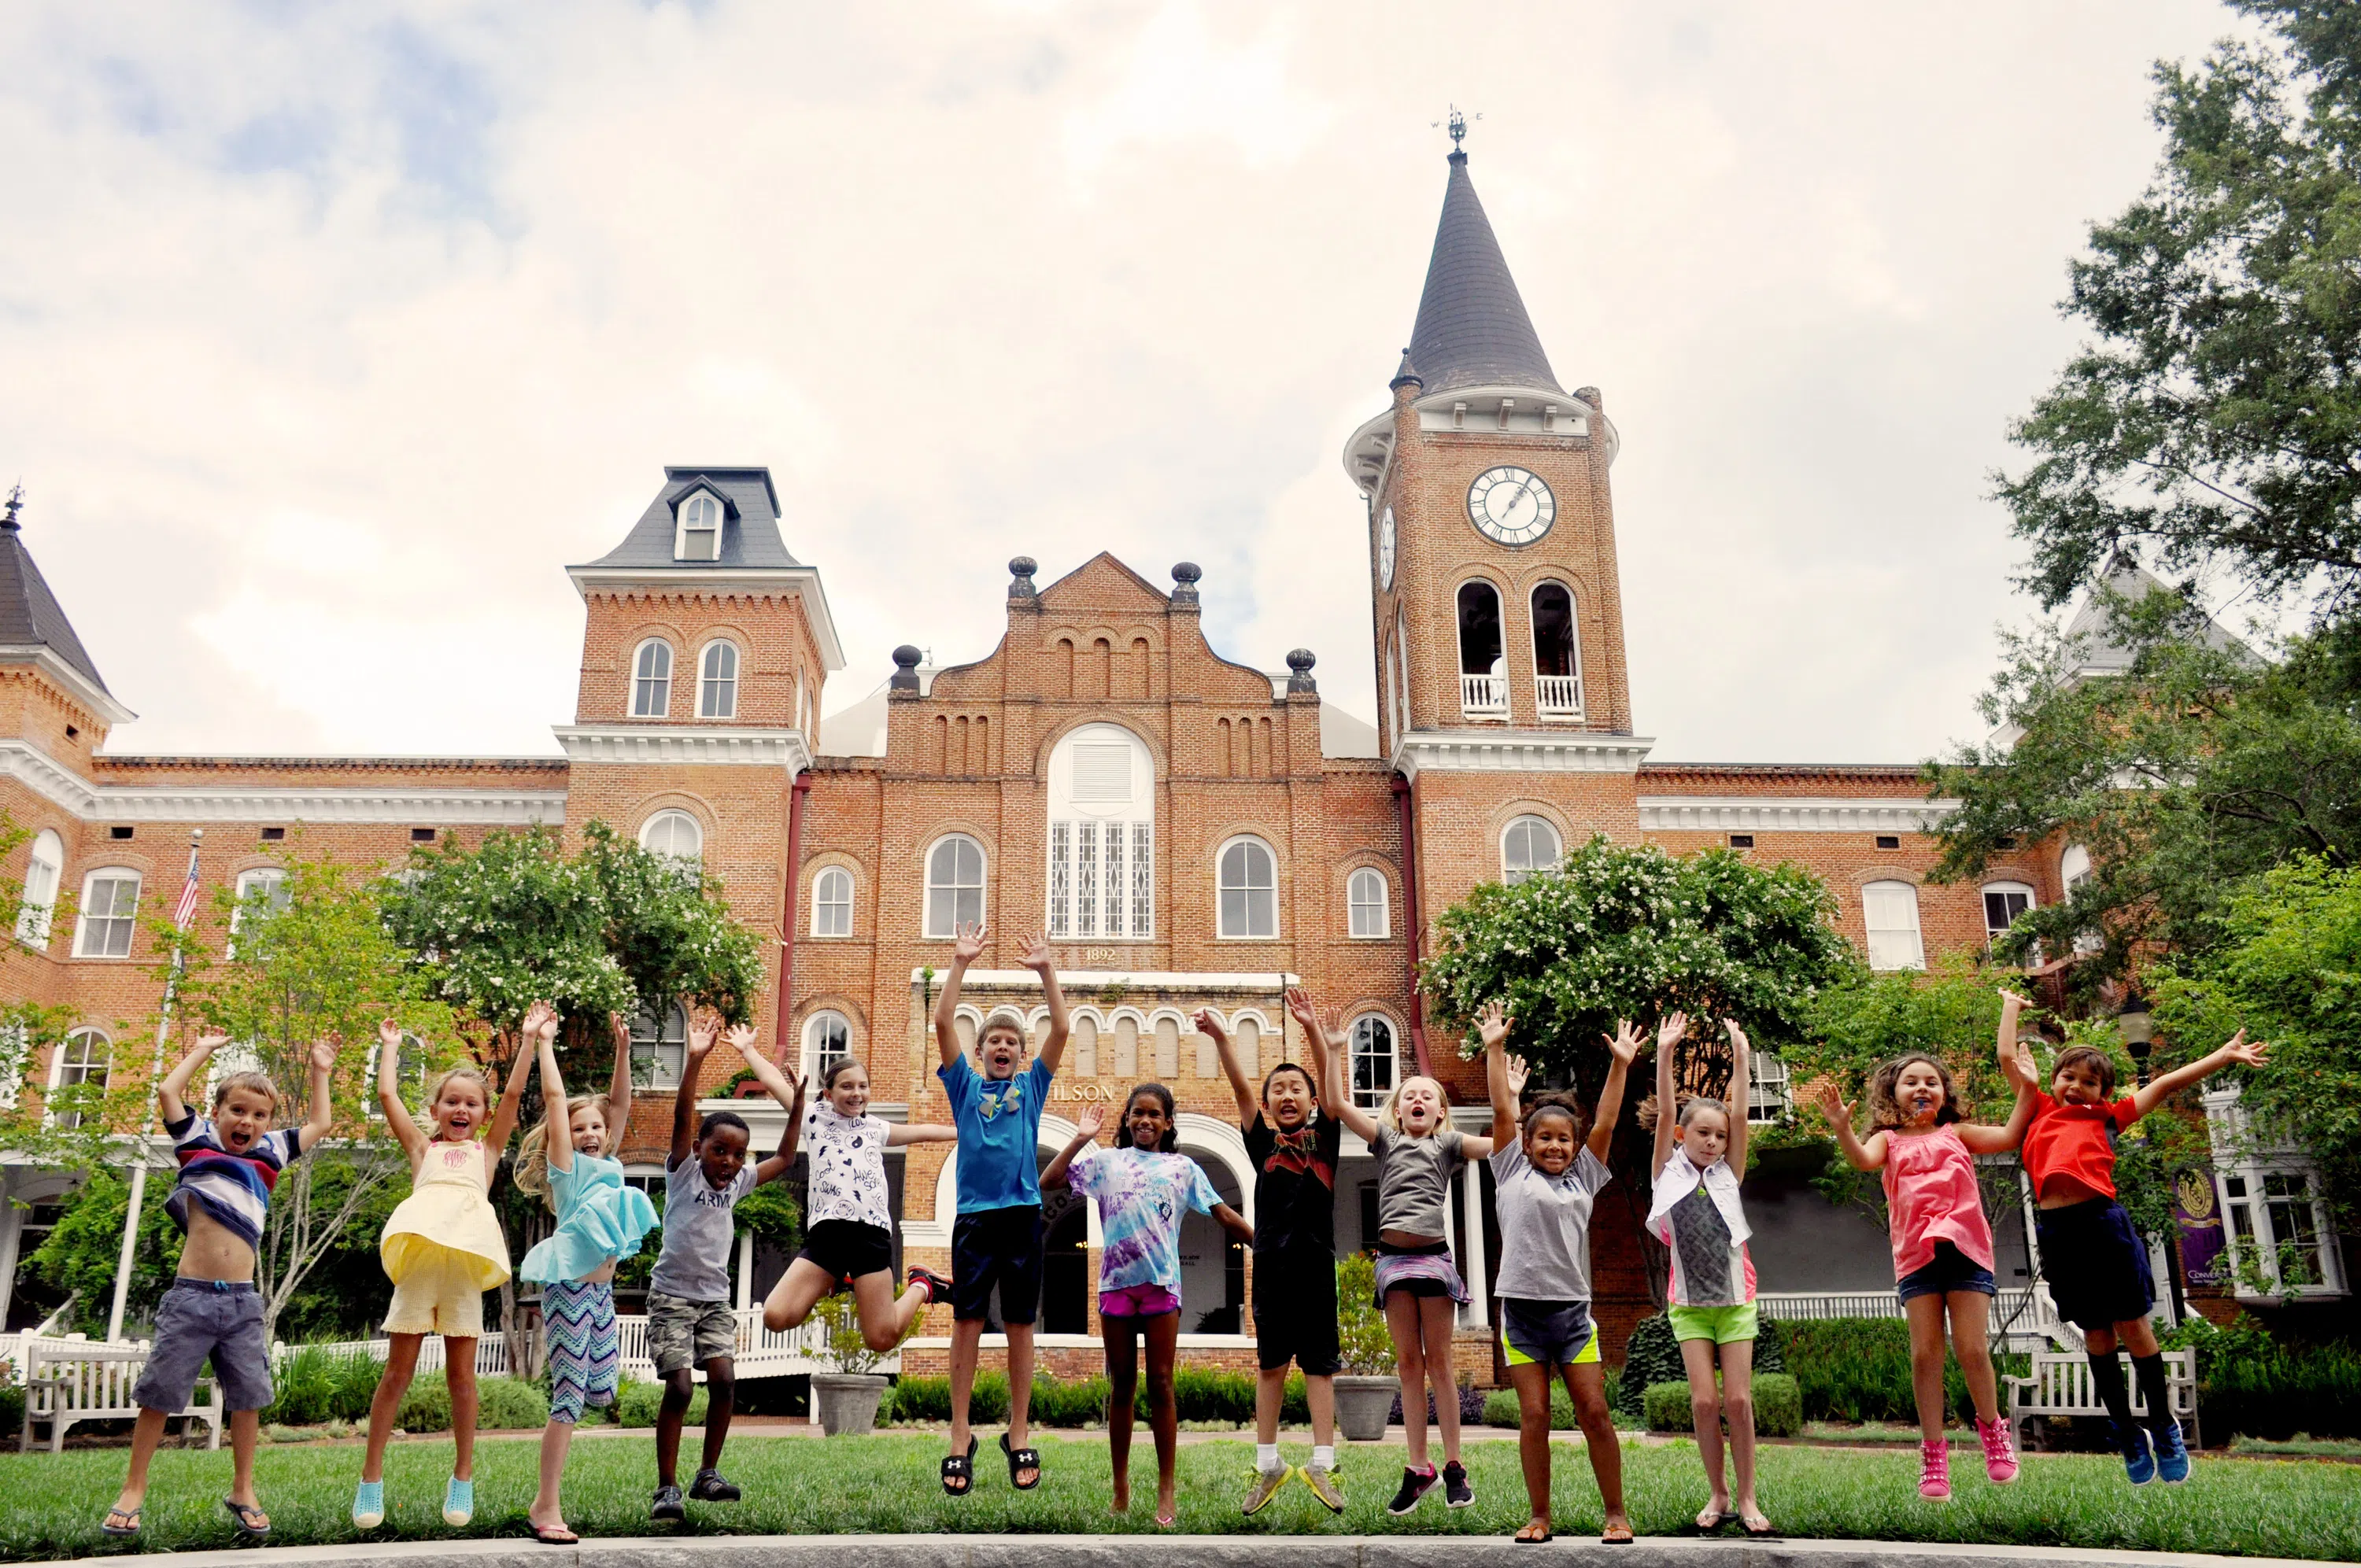 Elementary age students jump in the air in a forward facing line while enjoying a sunny day an outdoor space. A large brick building appears in the background.